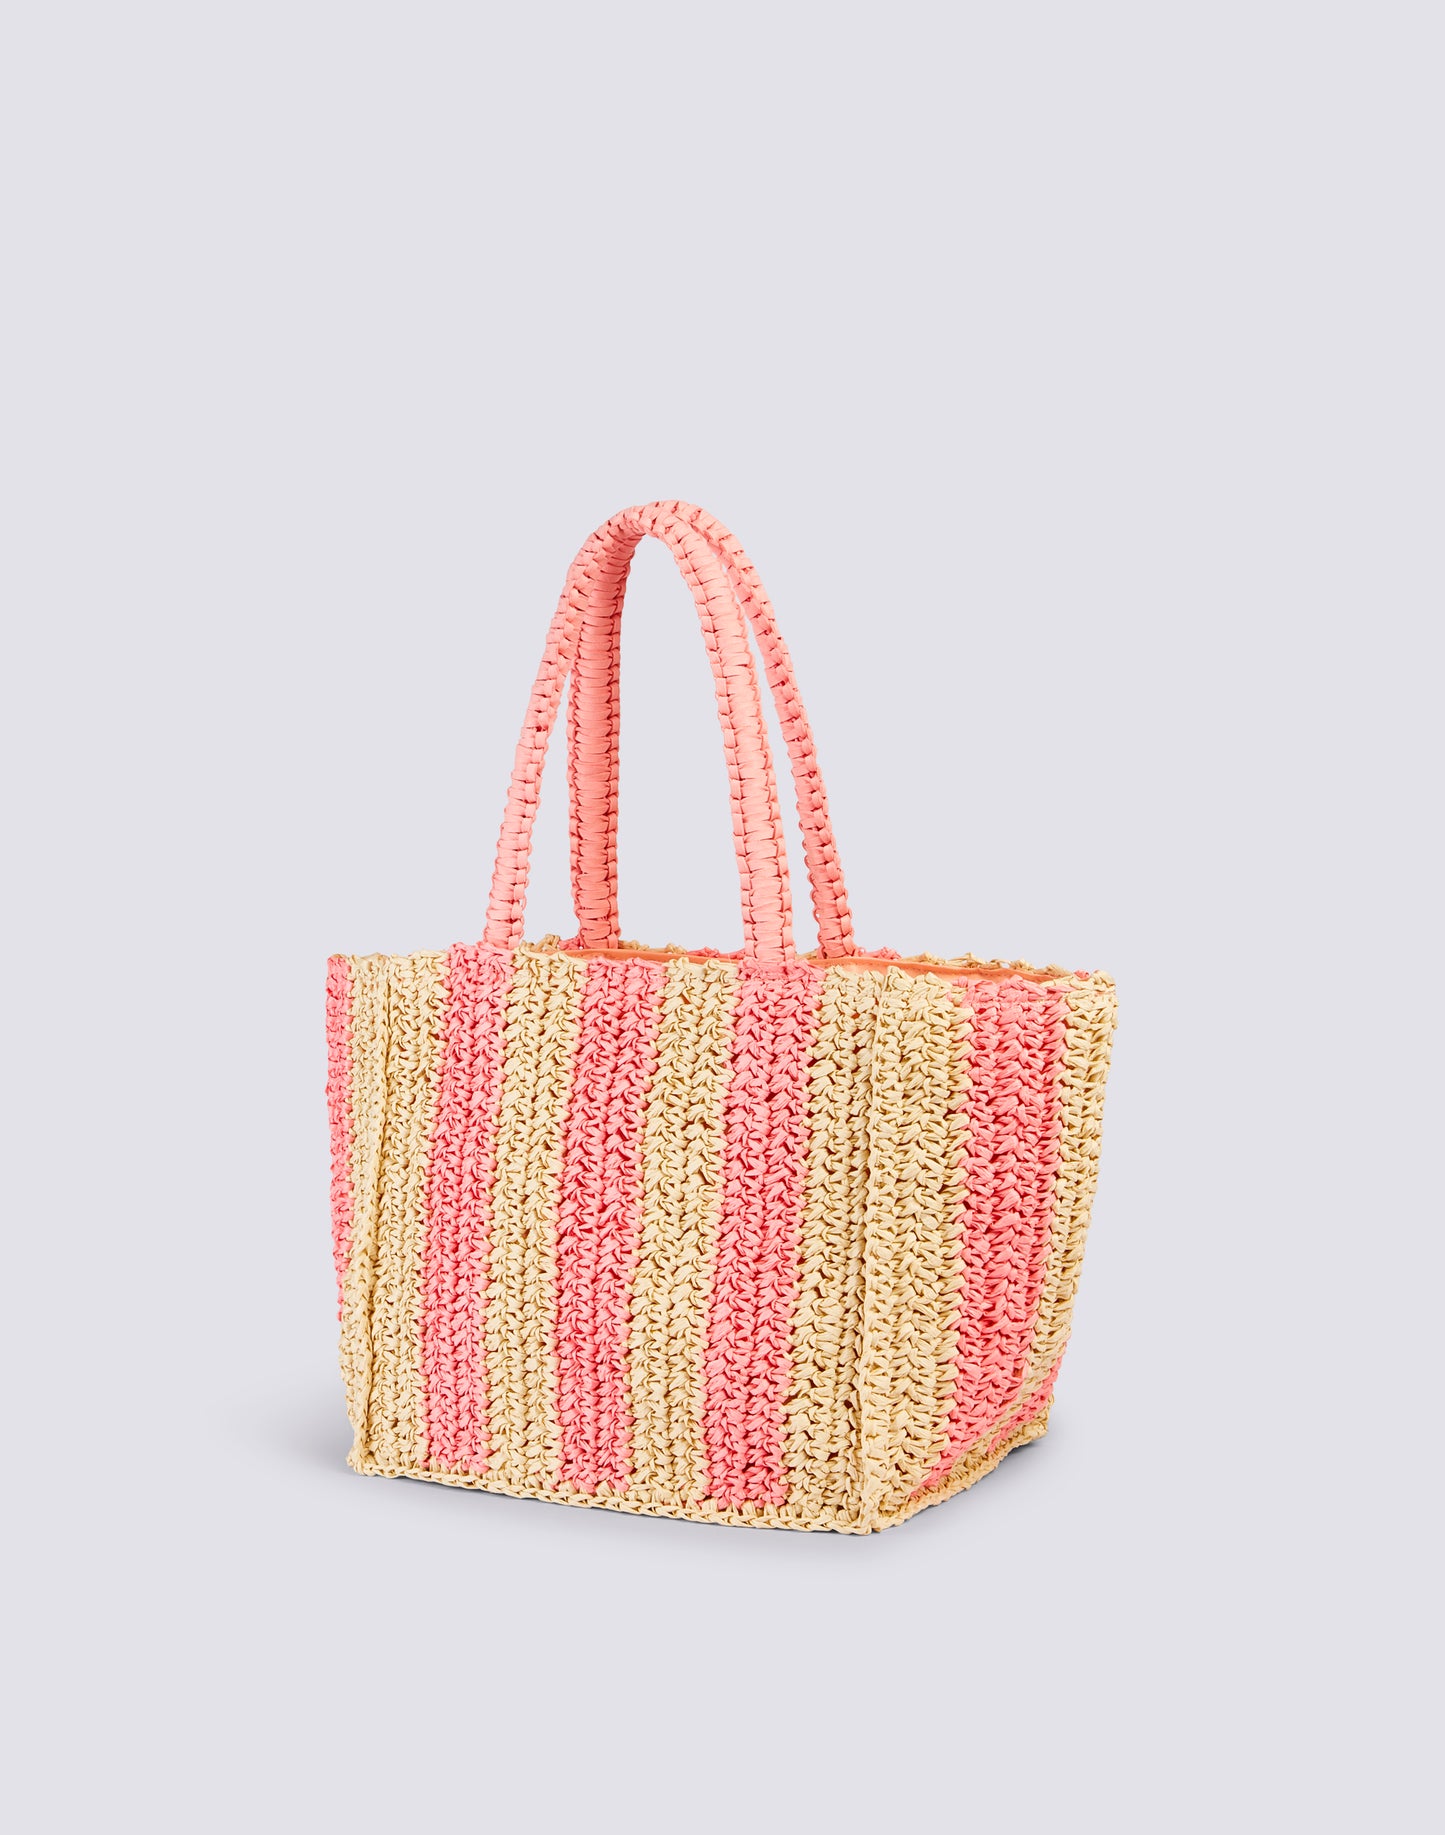 VITA - WOVEN STRAW BAG WITH EMBROIDERED LOGO